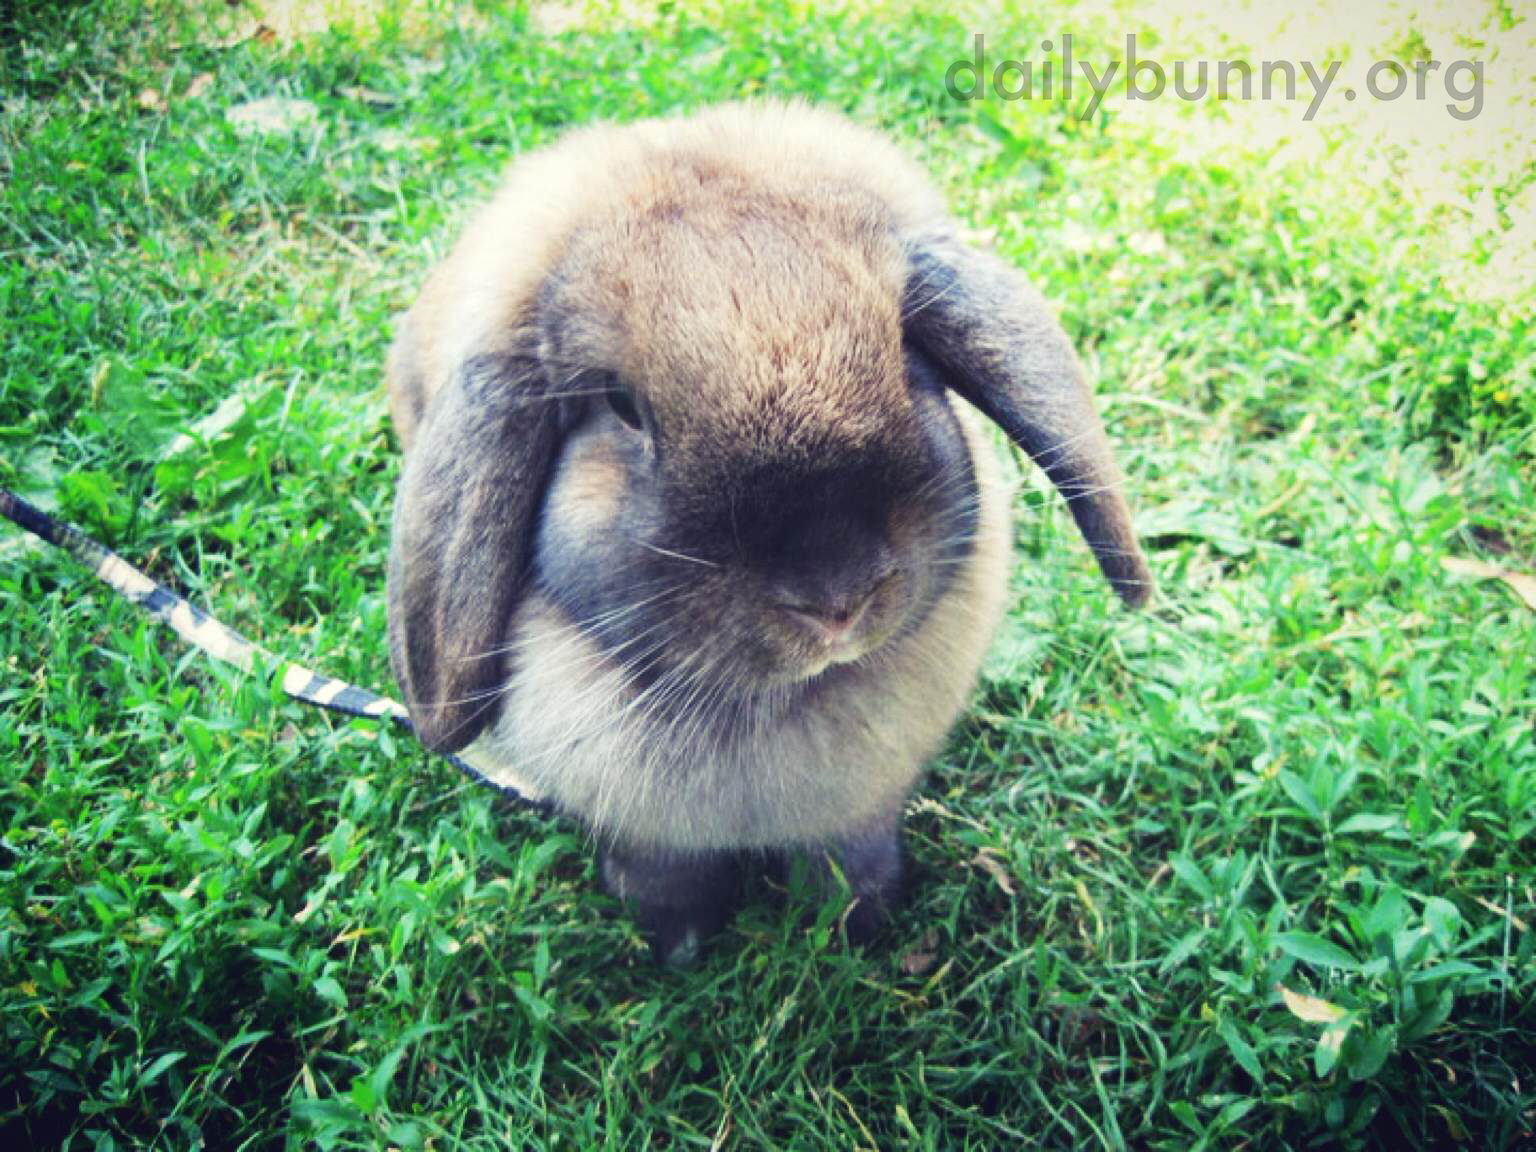 Bunny Gets in a Photograph Before Embarking on a Yard Exploration